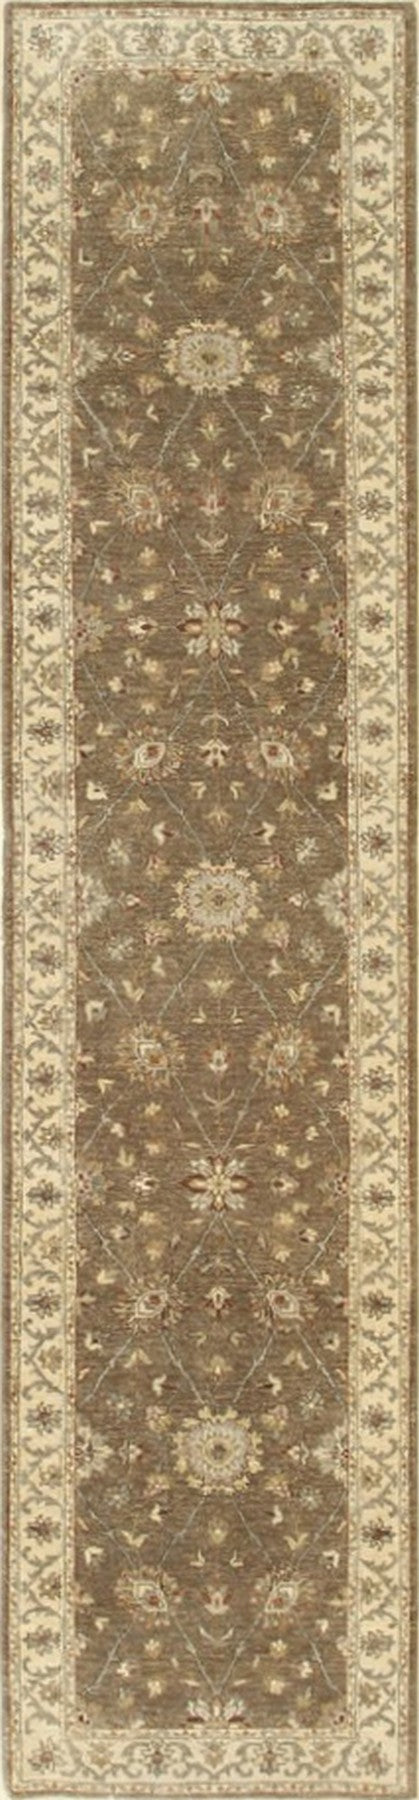 Brown Hand Knotted Wool Traditional Agra Rug, Made in India - made from 100% wool and are hand-knotted by skilled artisans